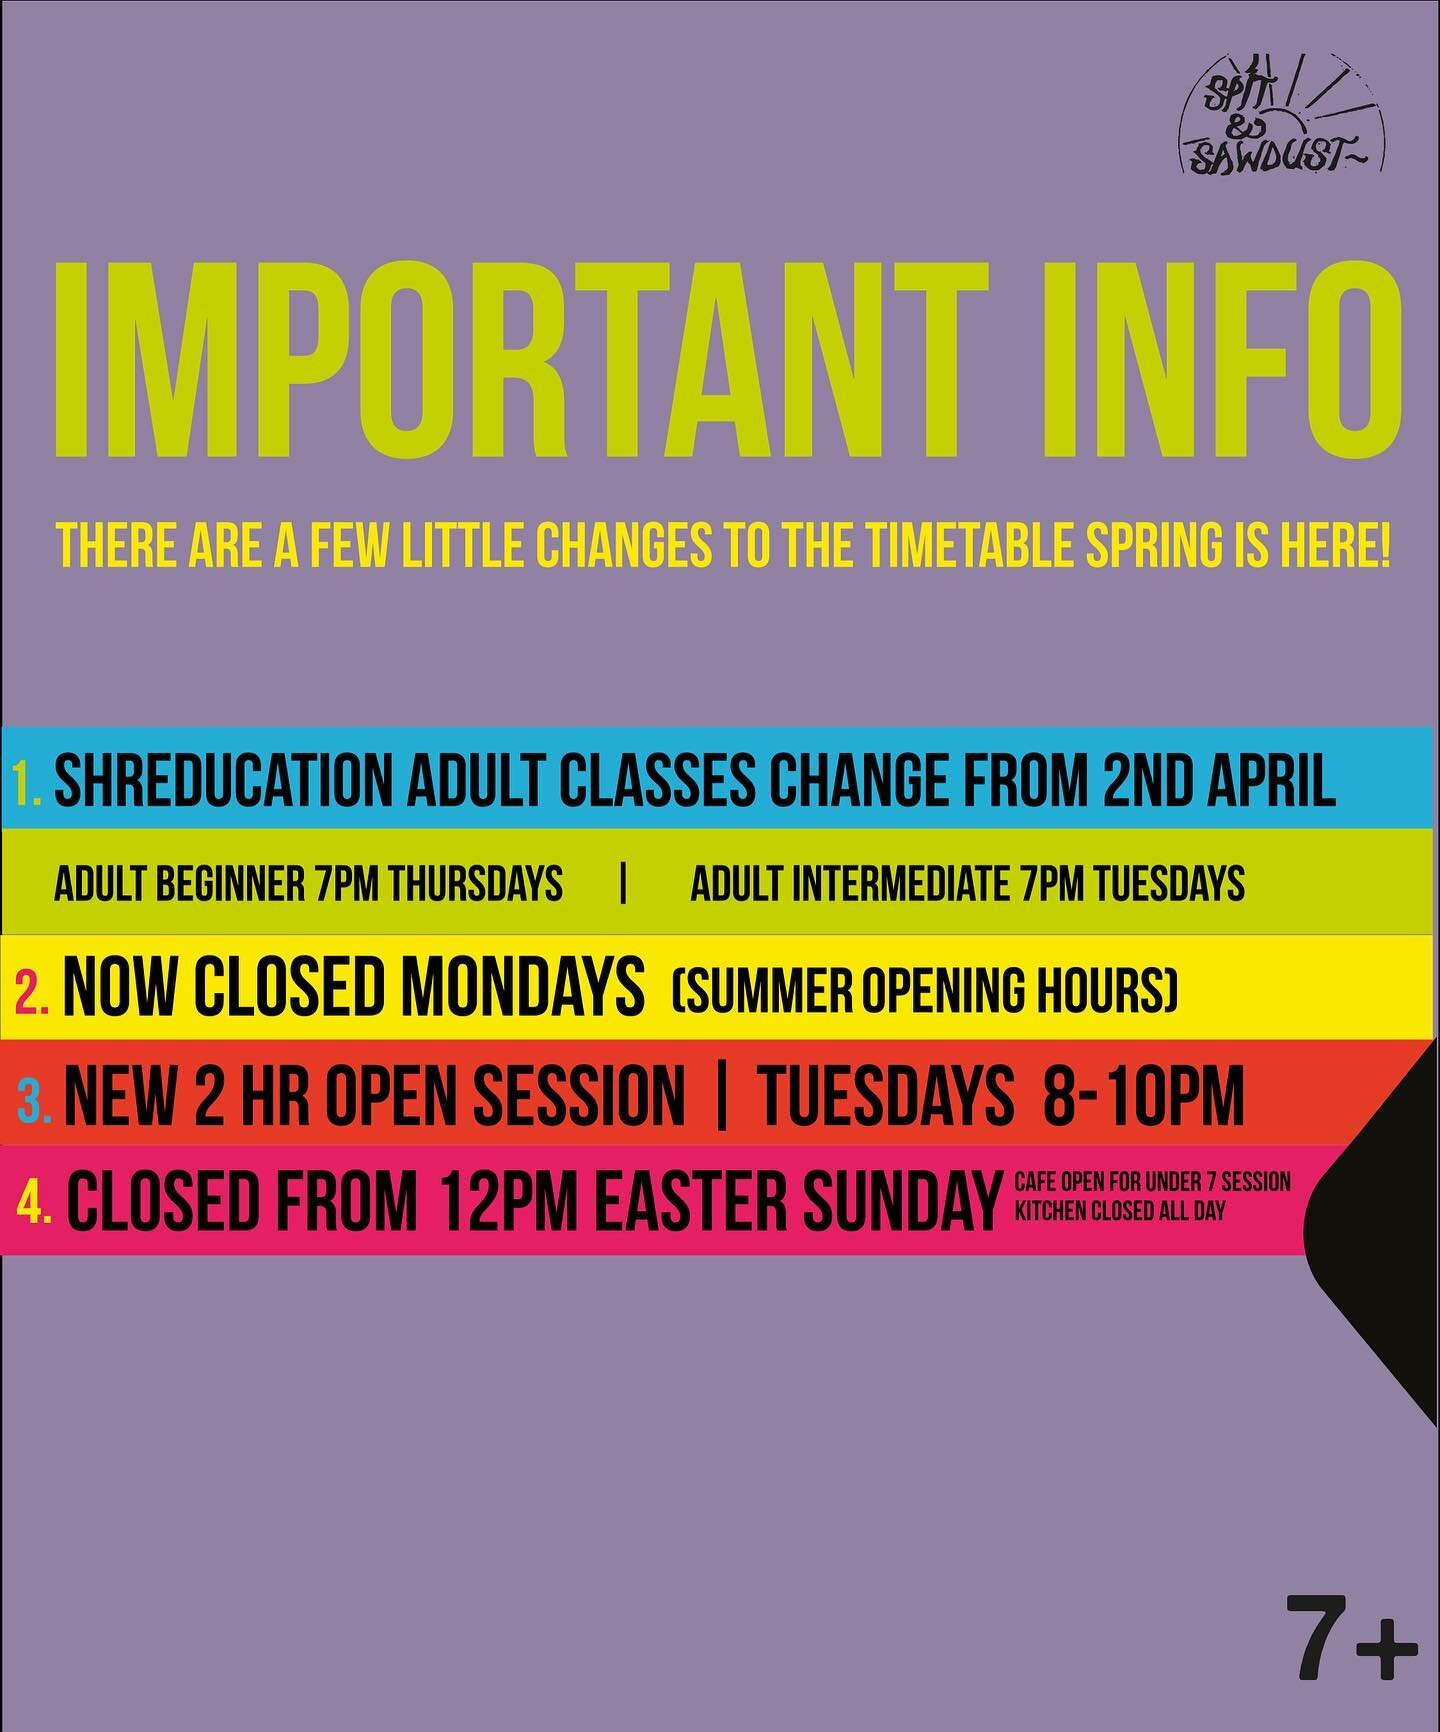 There&rsquo;s been a few little tweaks to our schedule! 

Adult Shreducation will now be 2 sessions a week. Tue for intermediates and Thursday for beginners.

We&rsquo;ve added a sweet little 2 hour open session to Tue evenings 8-10pm. (Makes up for 